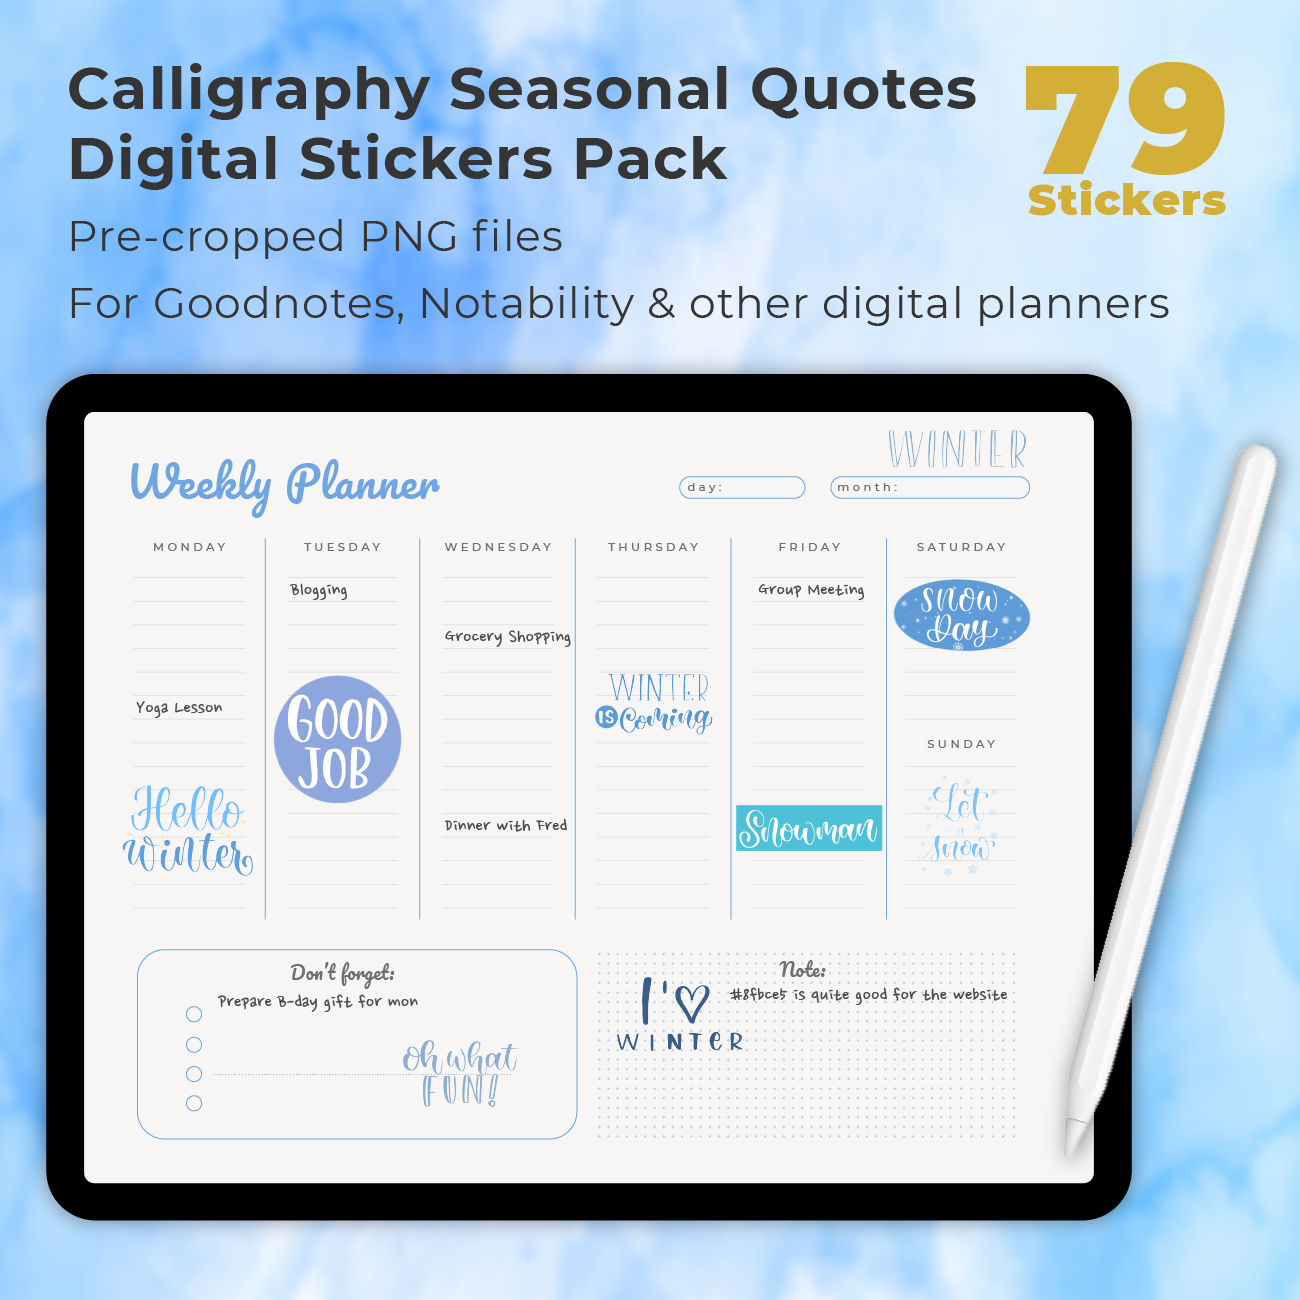 79 Calligraphy Seasonal Quotes Digital Stickers Pack